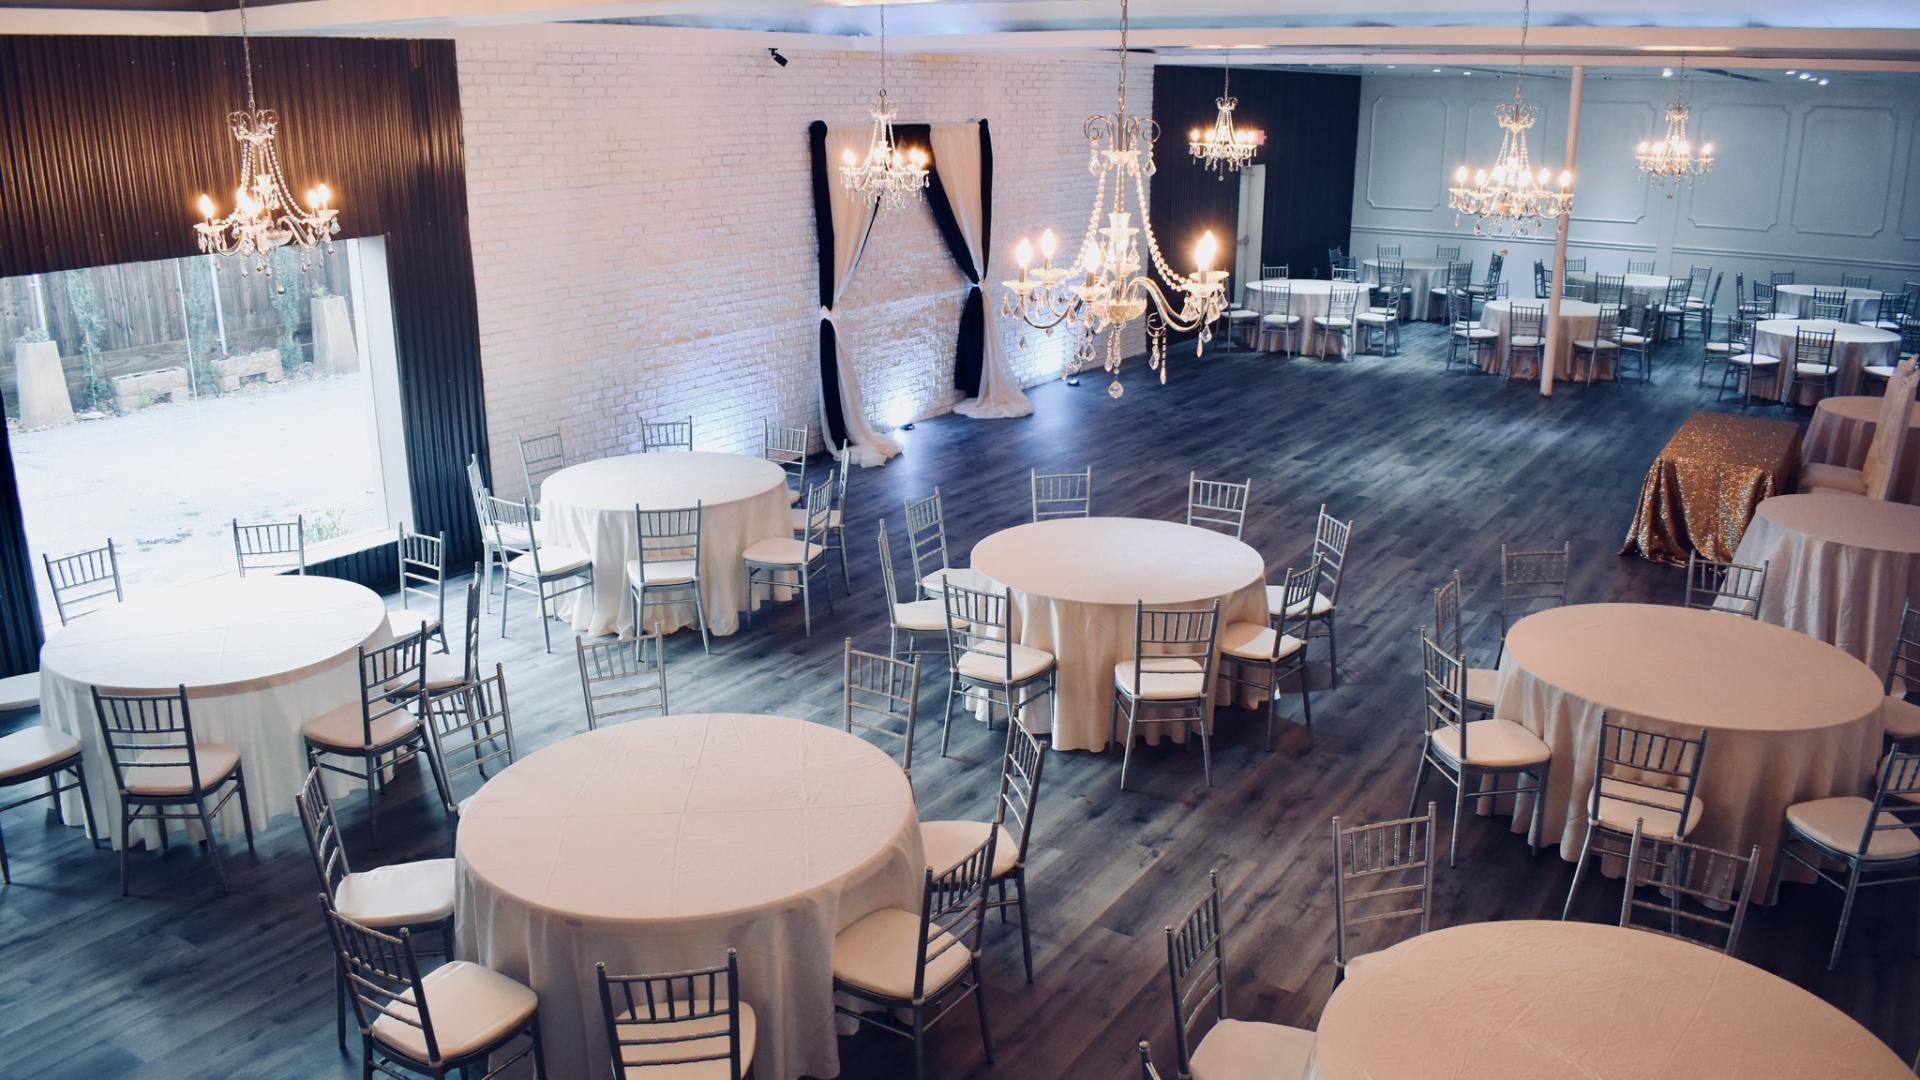 Charity Event Venues for Rent in Houston, TX